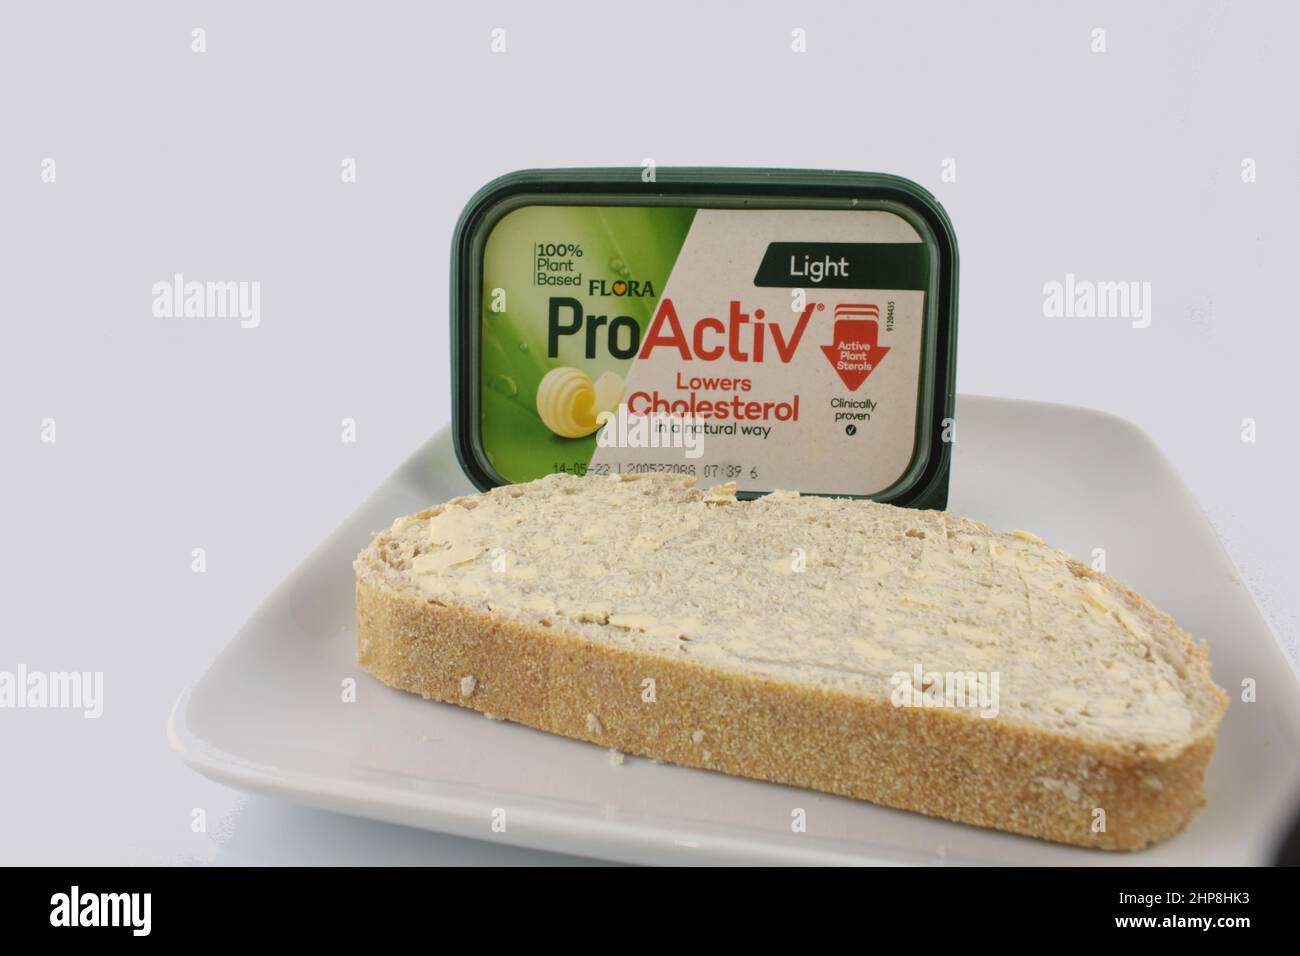 Sourdough bread with ProActiv plant based spread, Cholesterol lowering diet concept. Stock Photo